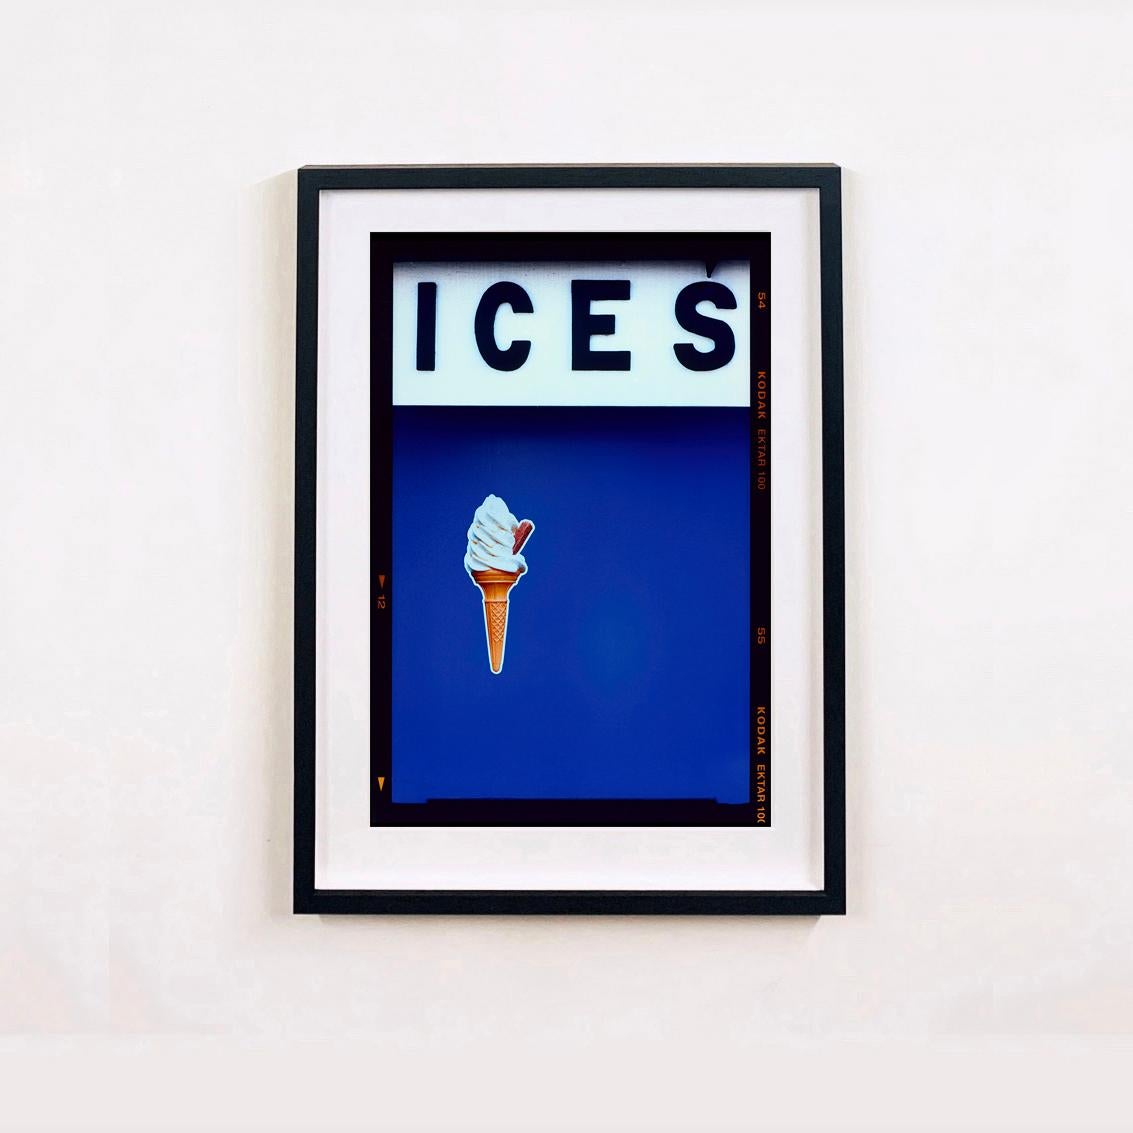 ICES Multicolor Set of Sixteen Framed Artworks.
A set of sixteen pop art prints by Richard Heeps from his Great British Staycation series 'On-Sea'.
Taken between lockdowns in September 2020, it has proved to be one of Richard's all time bestselling